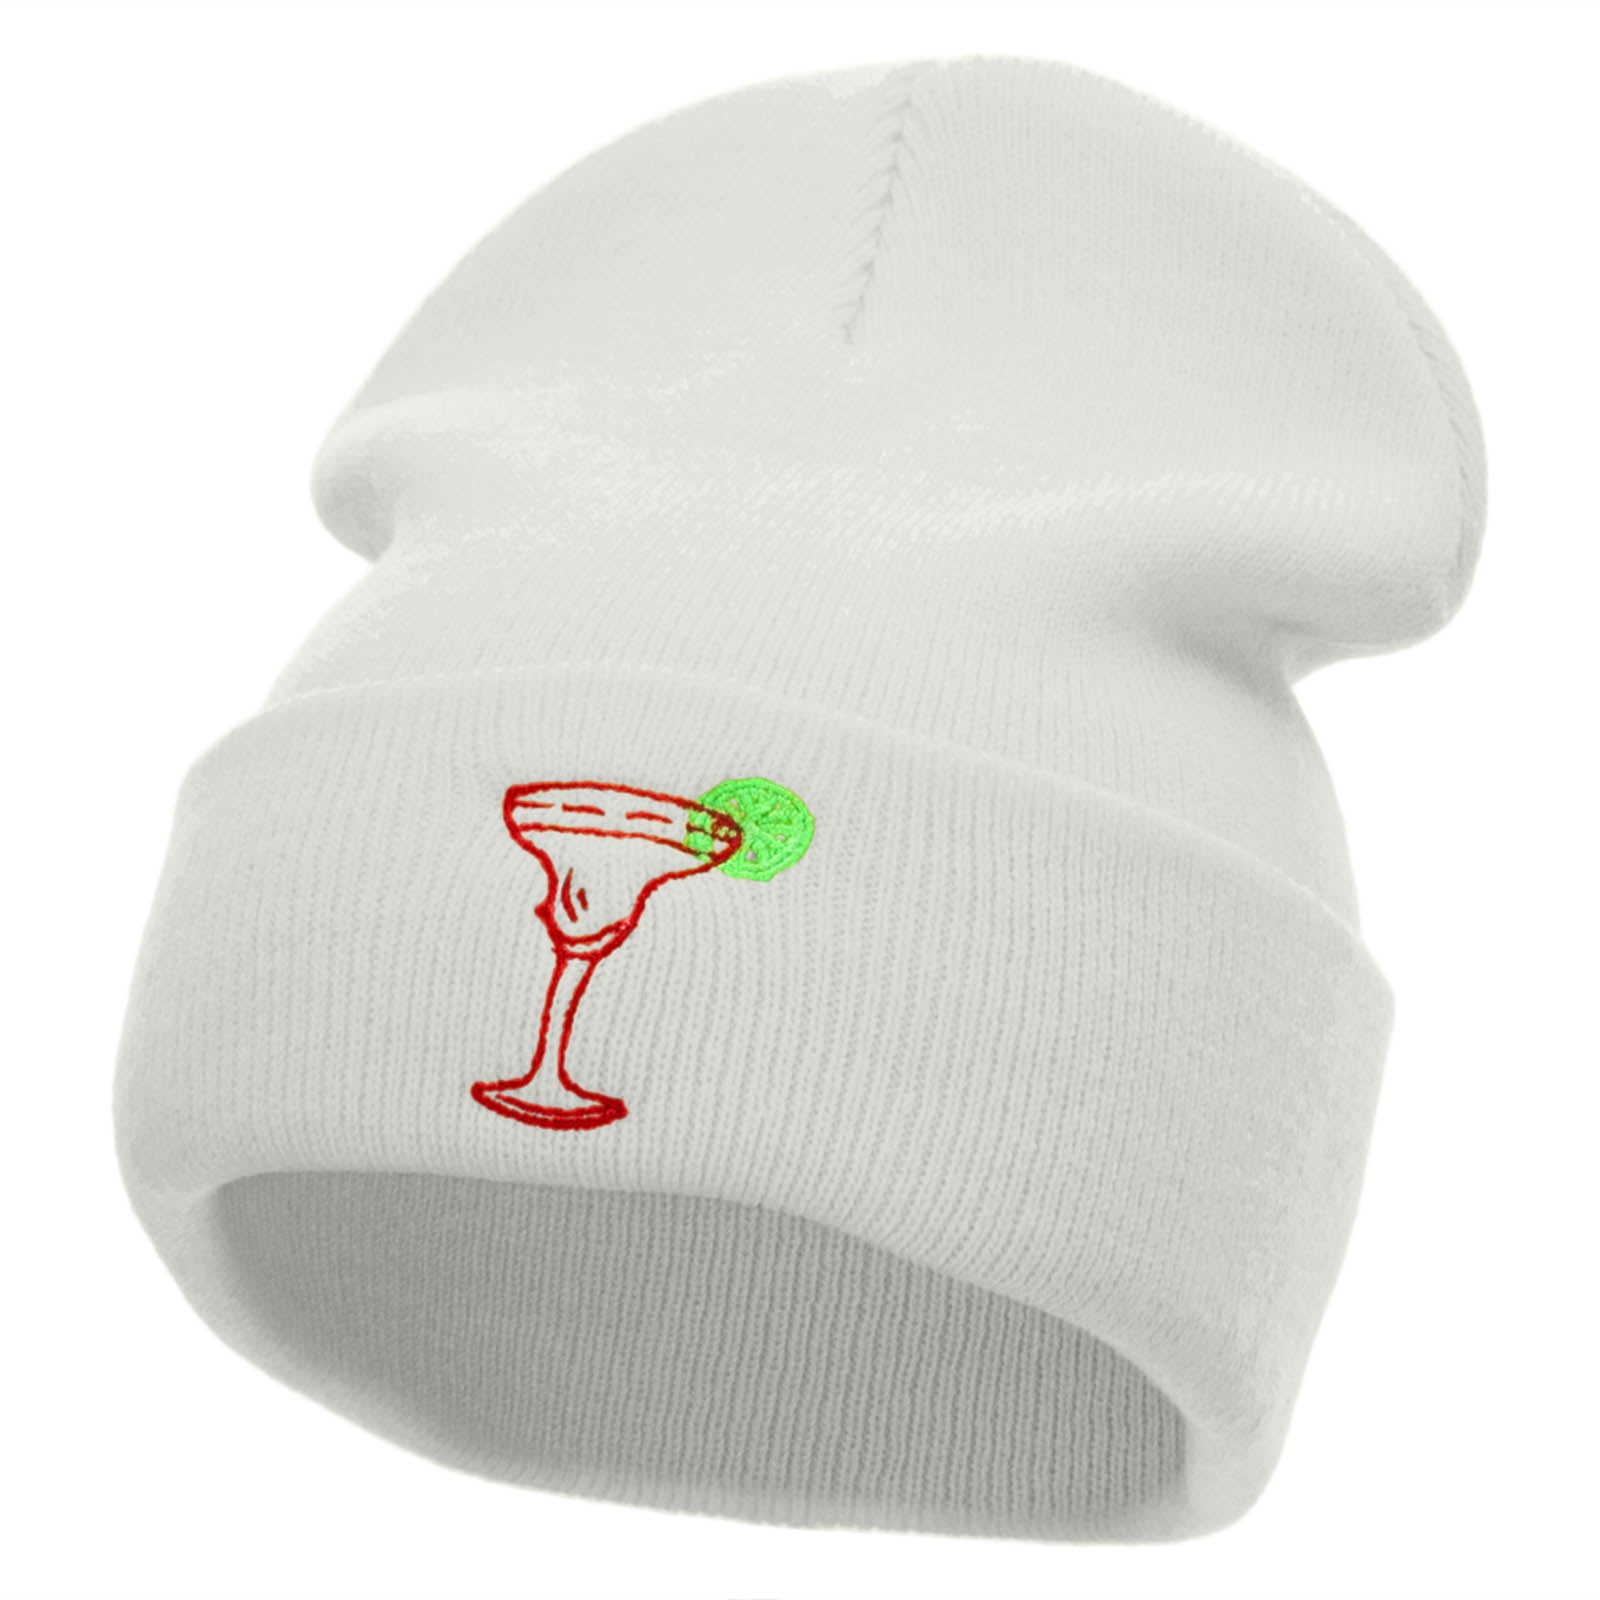 La Margarita Embroidered 12 Inch Long Knitted Beanie - White OSFM